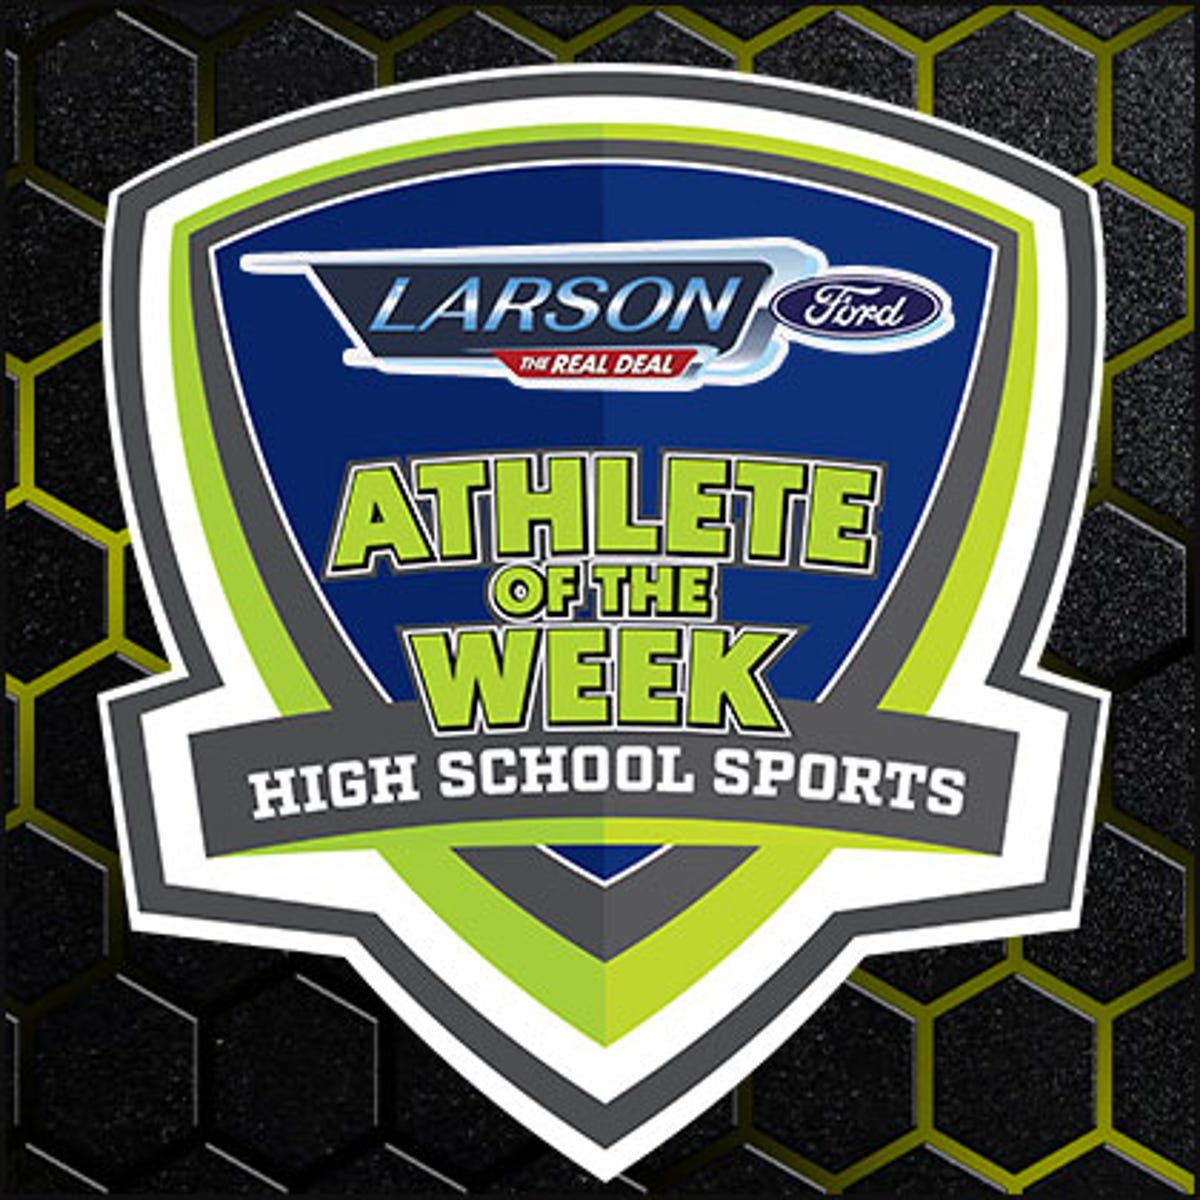 Vote for the Larson Ford Shore Baseball Player of the Week for Week 5